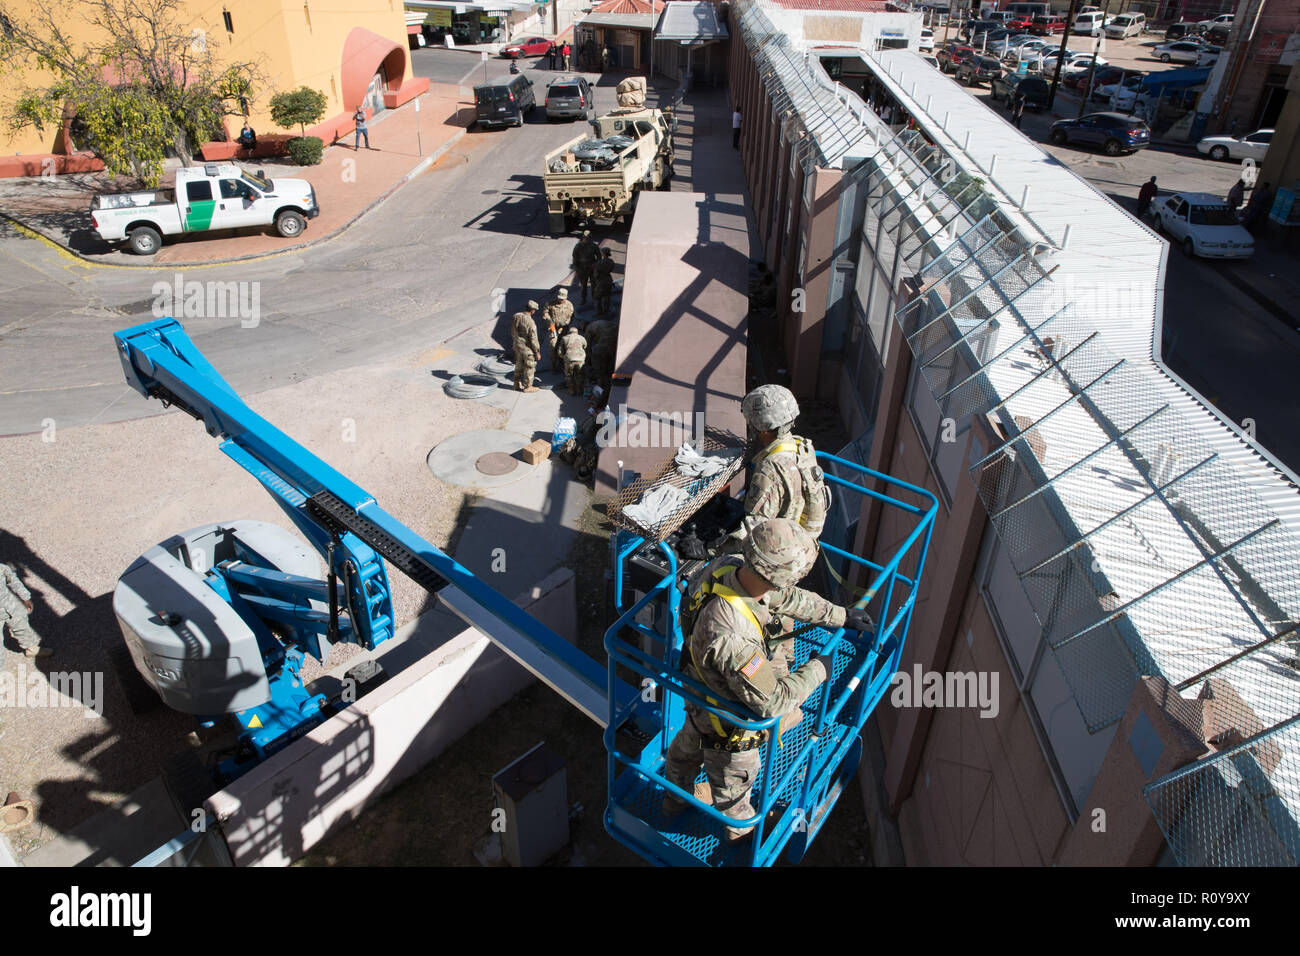 U.S. Army soldiers install concertina wire along the Mexico border at the Nogales DeConcini Port November 6, 2018 Nogales, Arizona. The troops are deploying to the U.S. - Mexico border by order of President Donald Trump to intercept the Honduran migrant caravan. Stock Photo